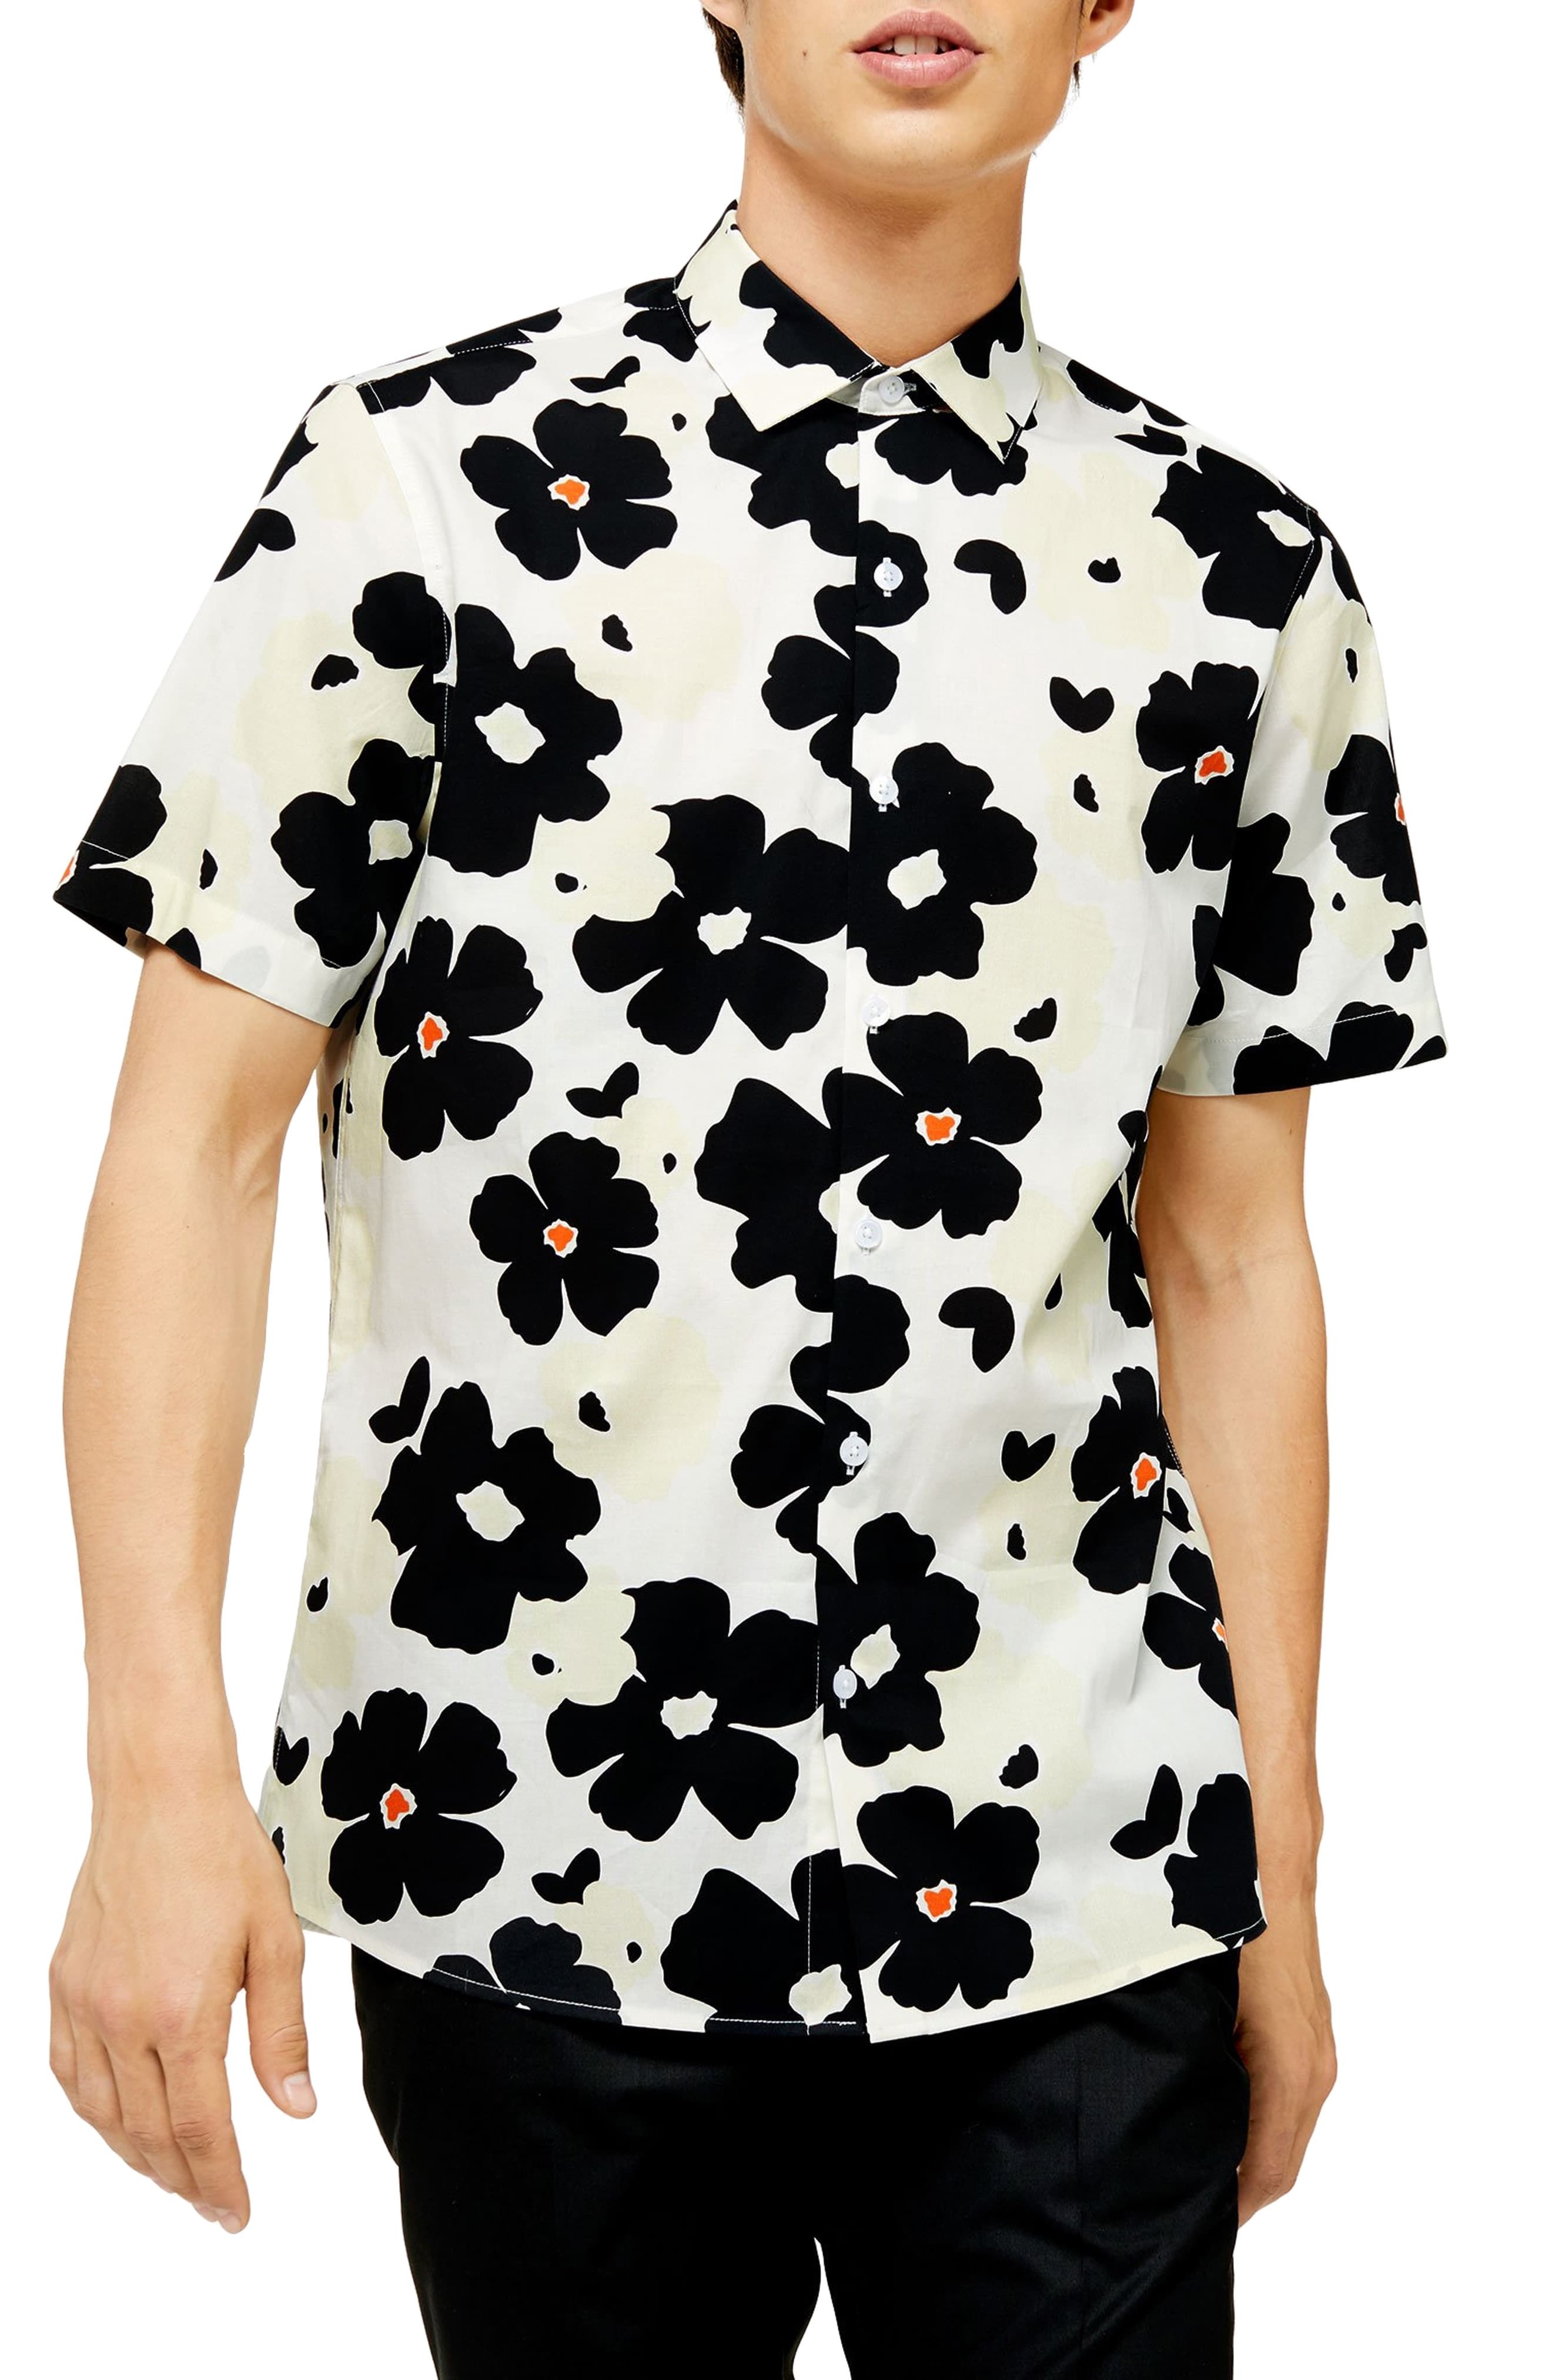 MENS WHITE FLORAL PRINT S/SLEEVE SHIRT FROM TOPMAN IN SIZES LARGE-2XLARGE BNWT 